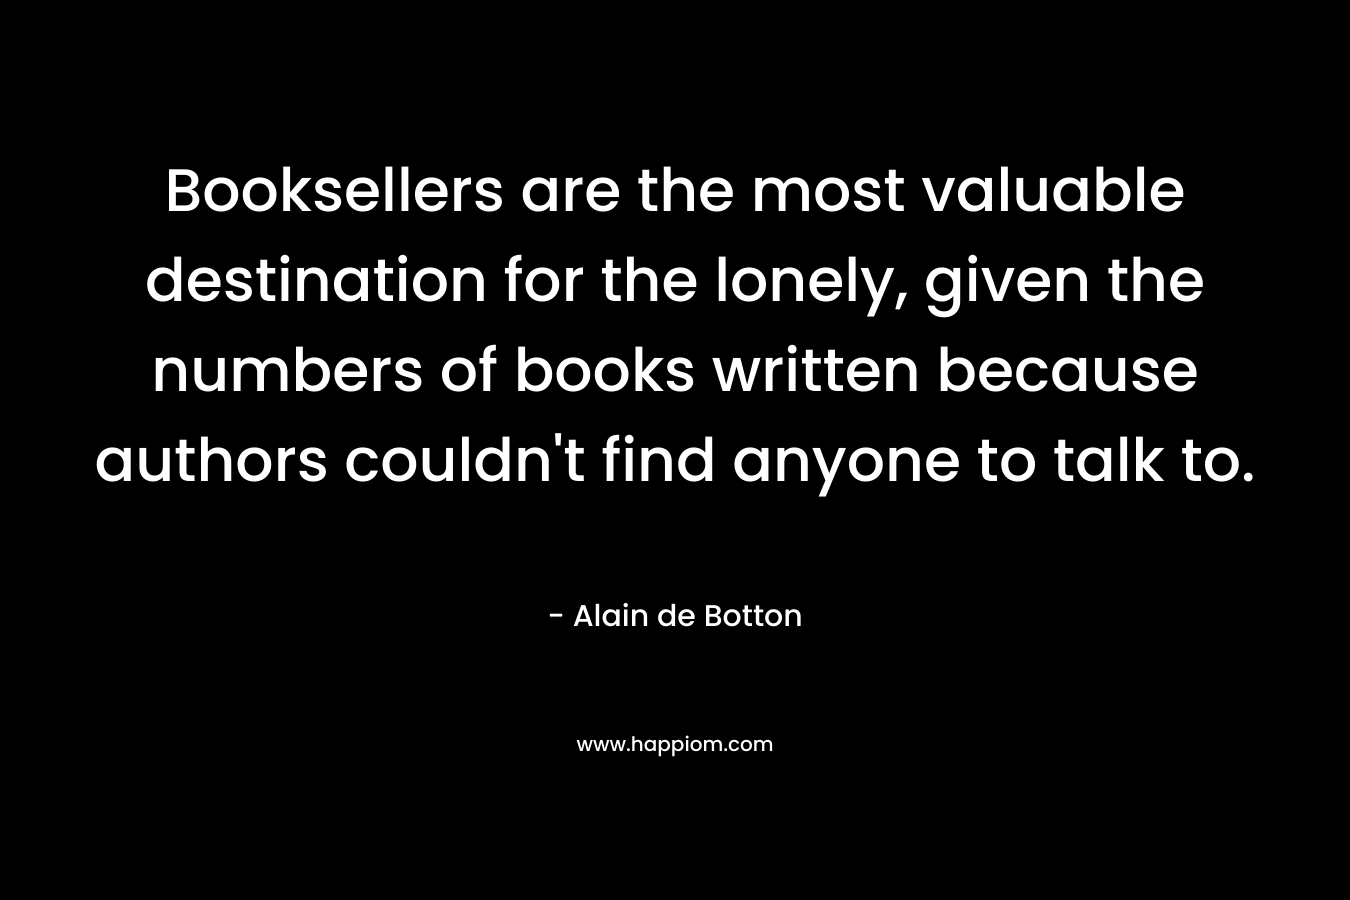 Booksellers are the most valuable destination for the lonely, given the numbers of books written because authors couldn't find anyone to talk to.